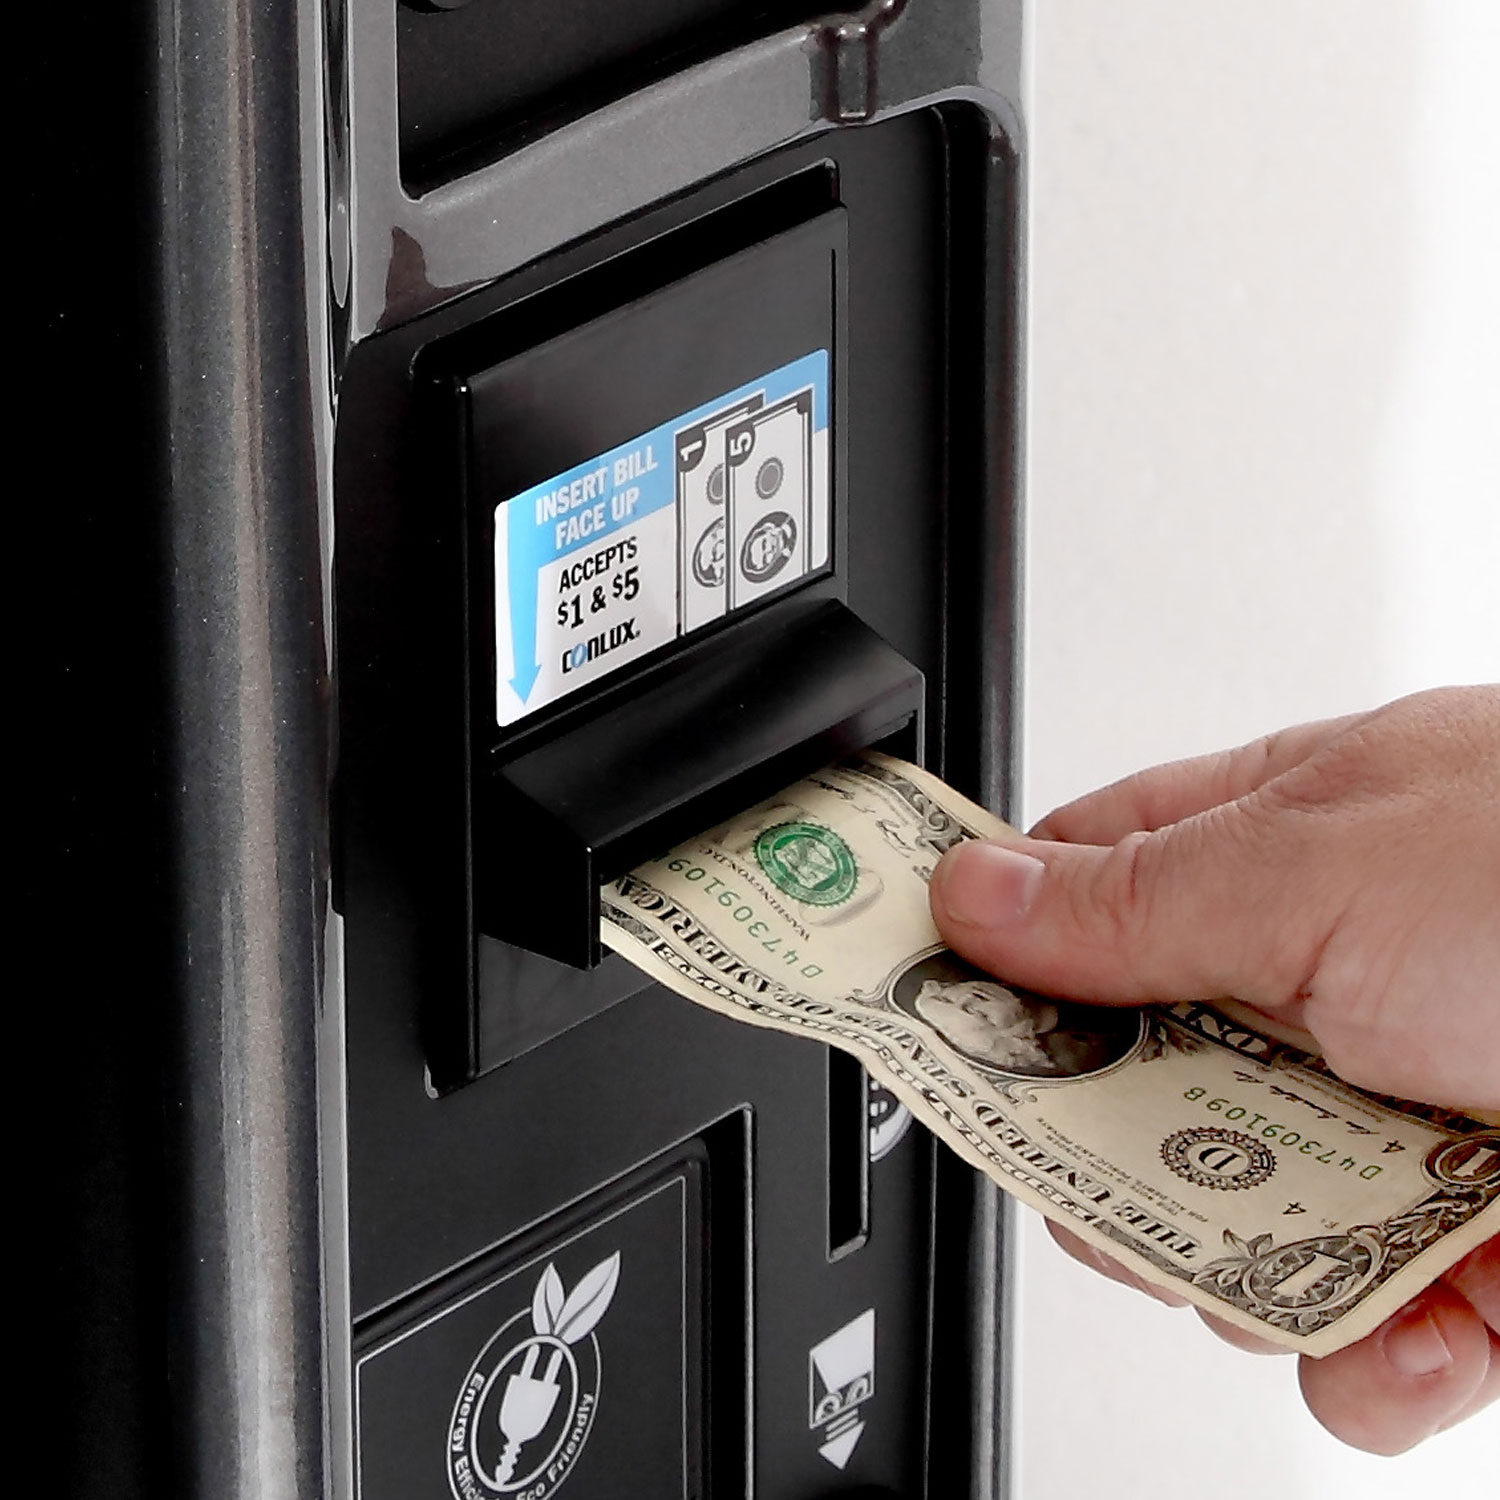 A customer purchasing a product with a $1 bill through a bill acceptor on a Selectivend vending machine.